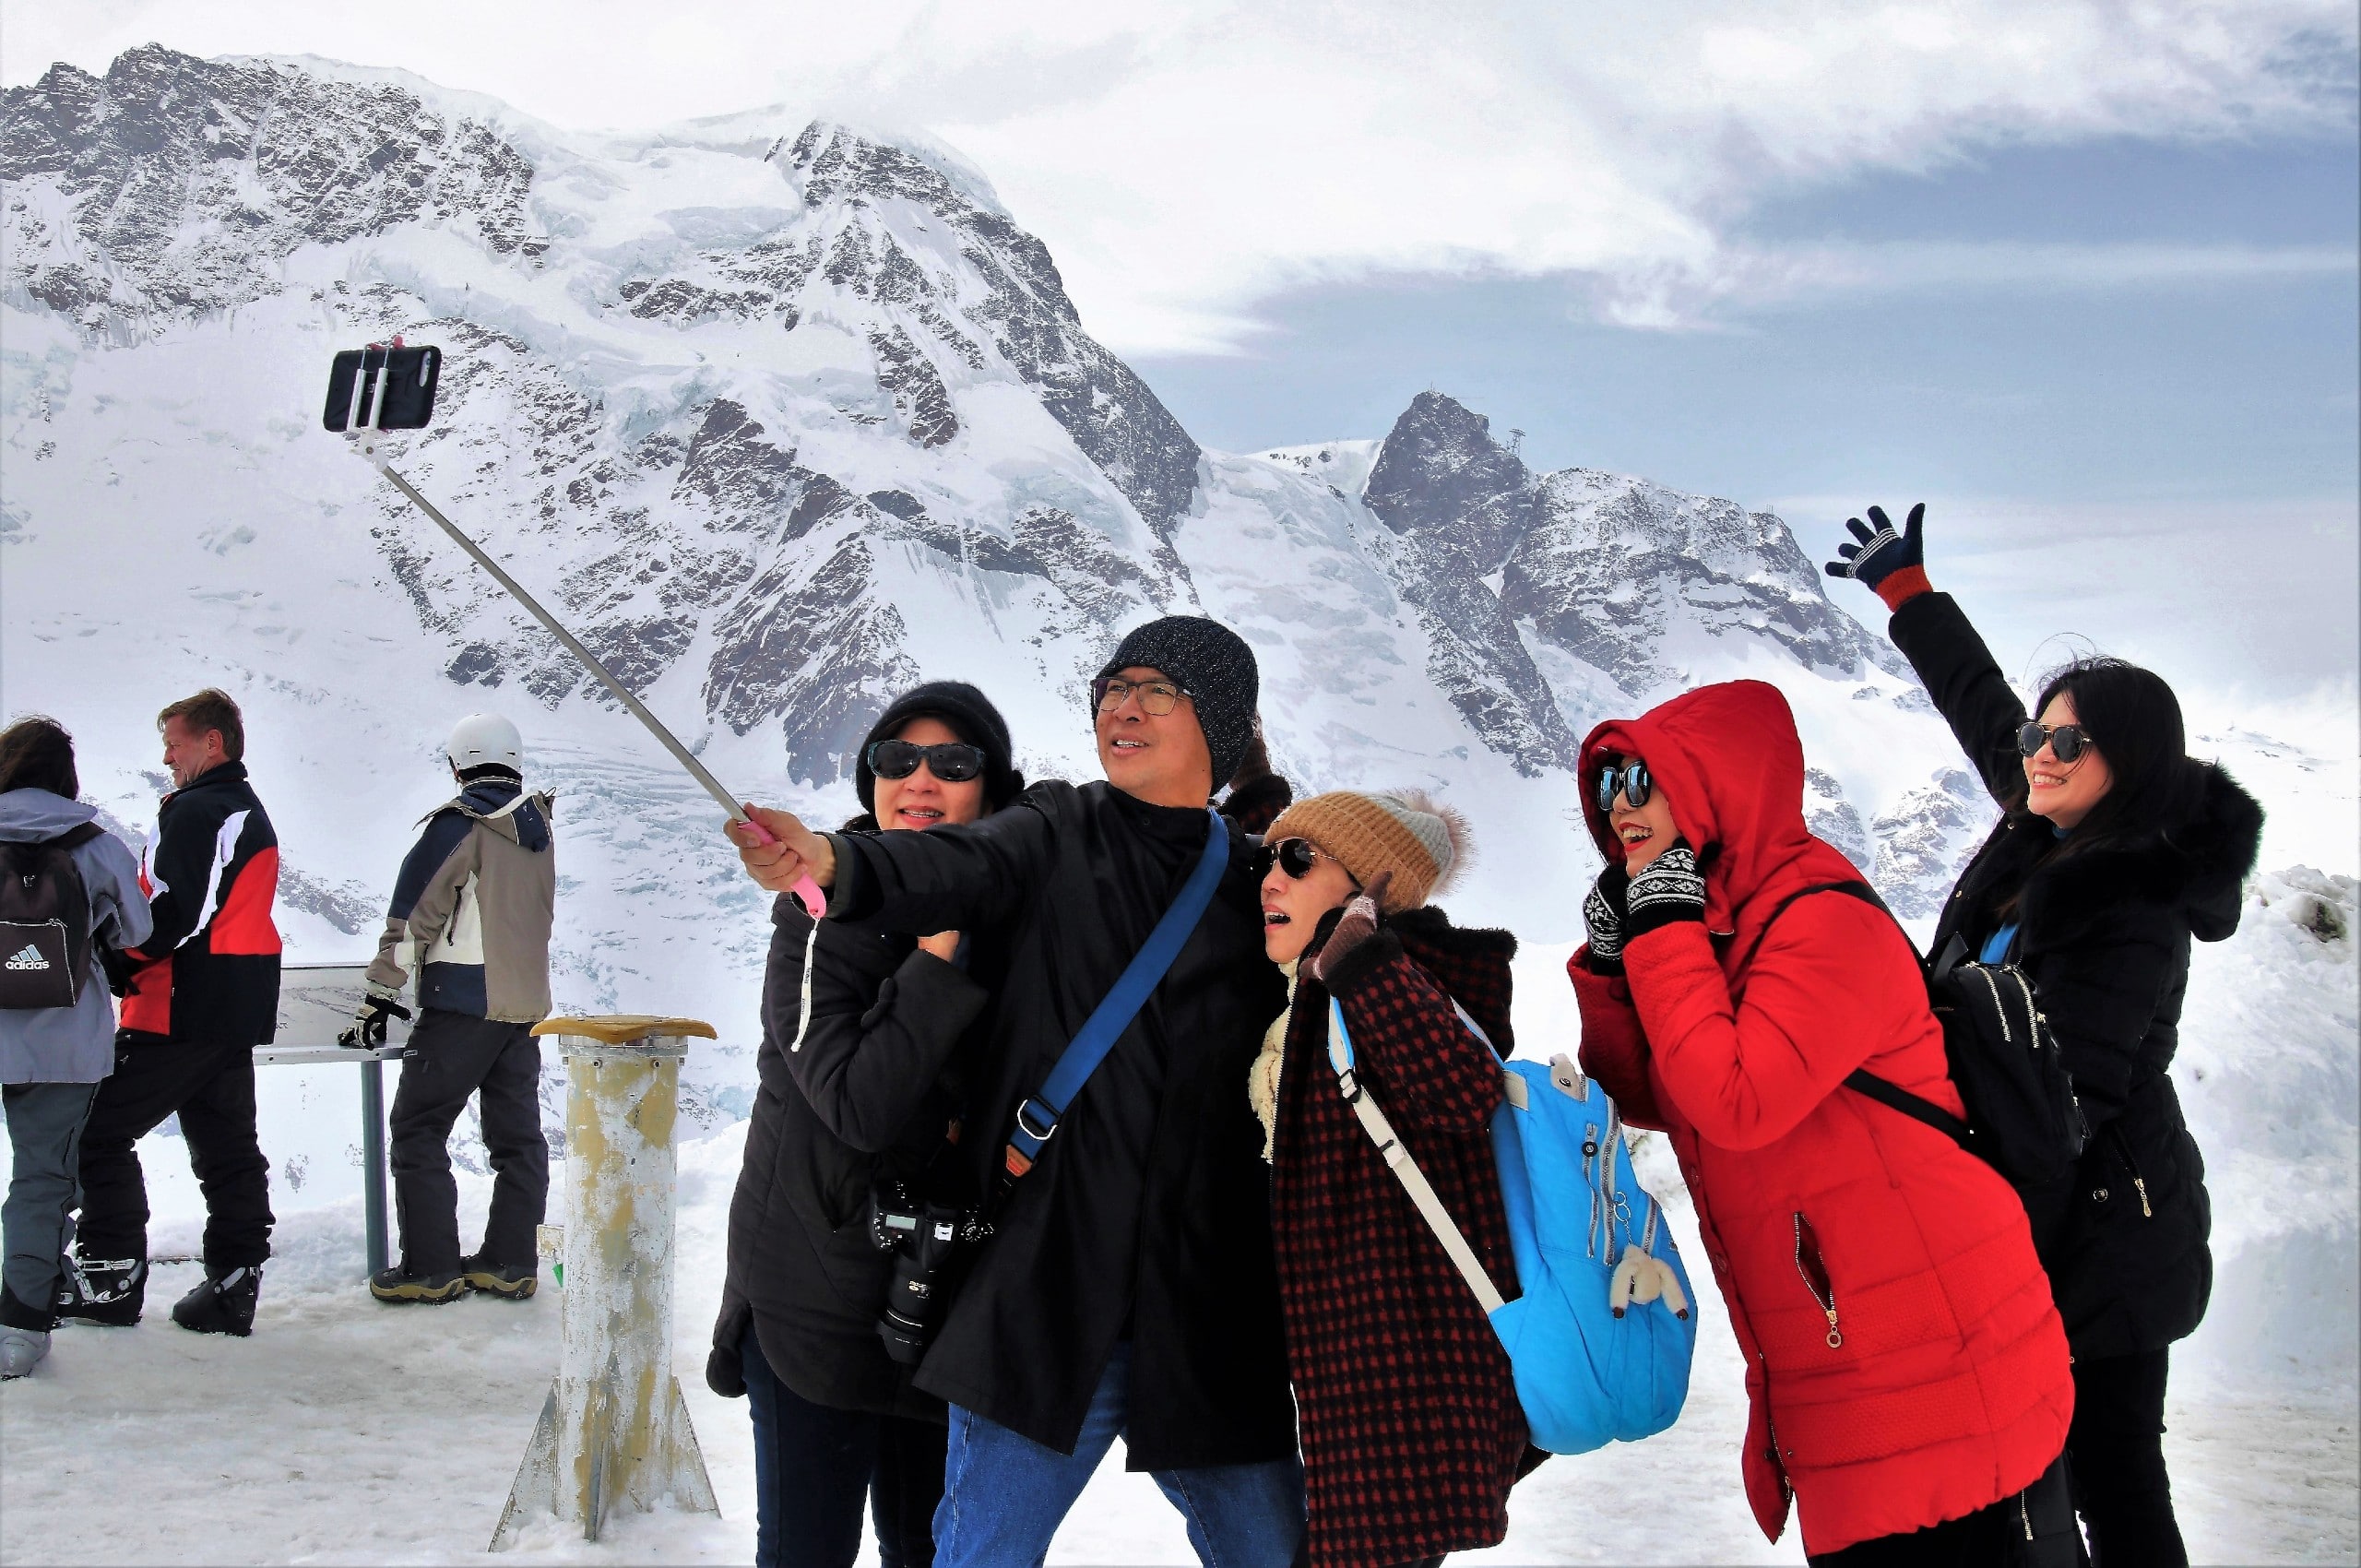 Group of travellers taking a selfie in the mountains